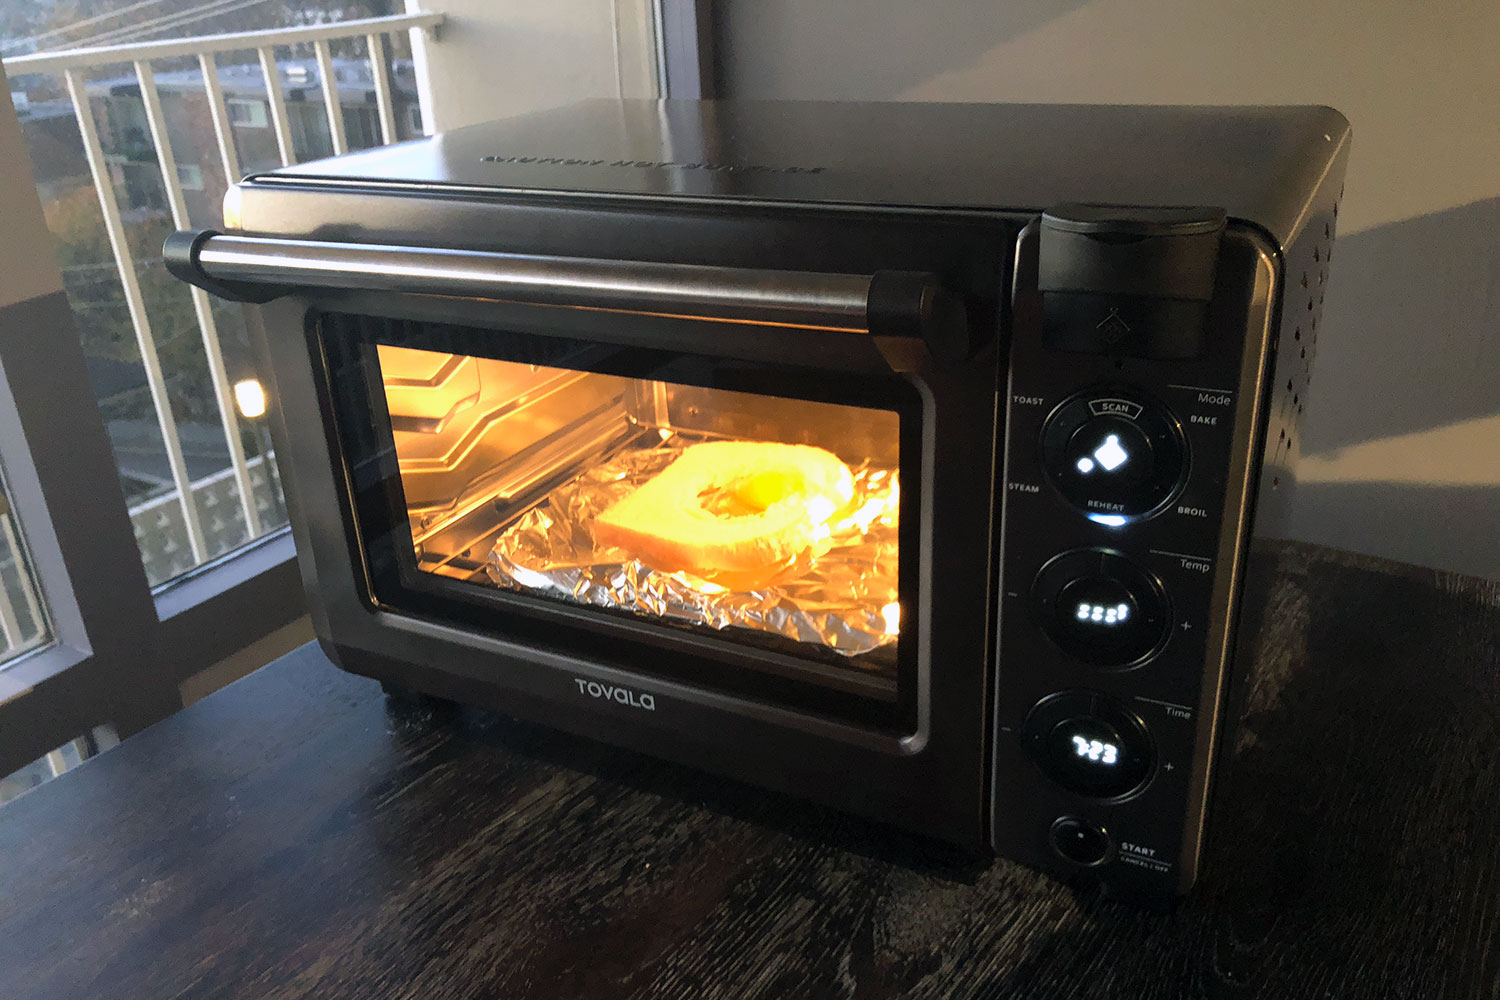 https://www.digitaltrends.com/wp-content/uploads/2018/11/tovala-steam-oven-review-8.jpg?fit=1500%2C1000&p=1